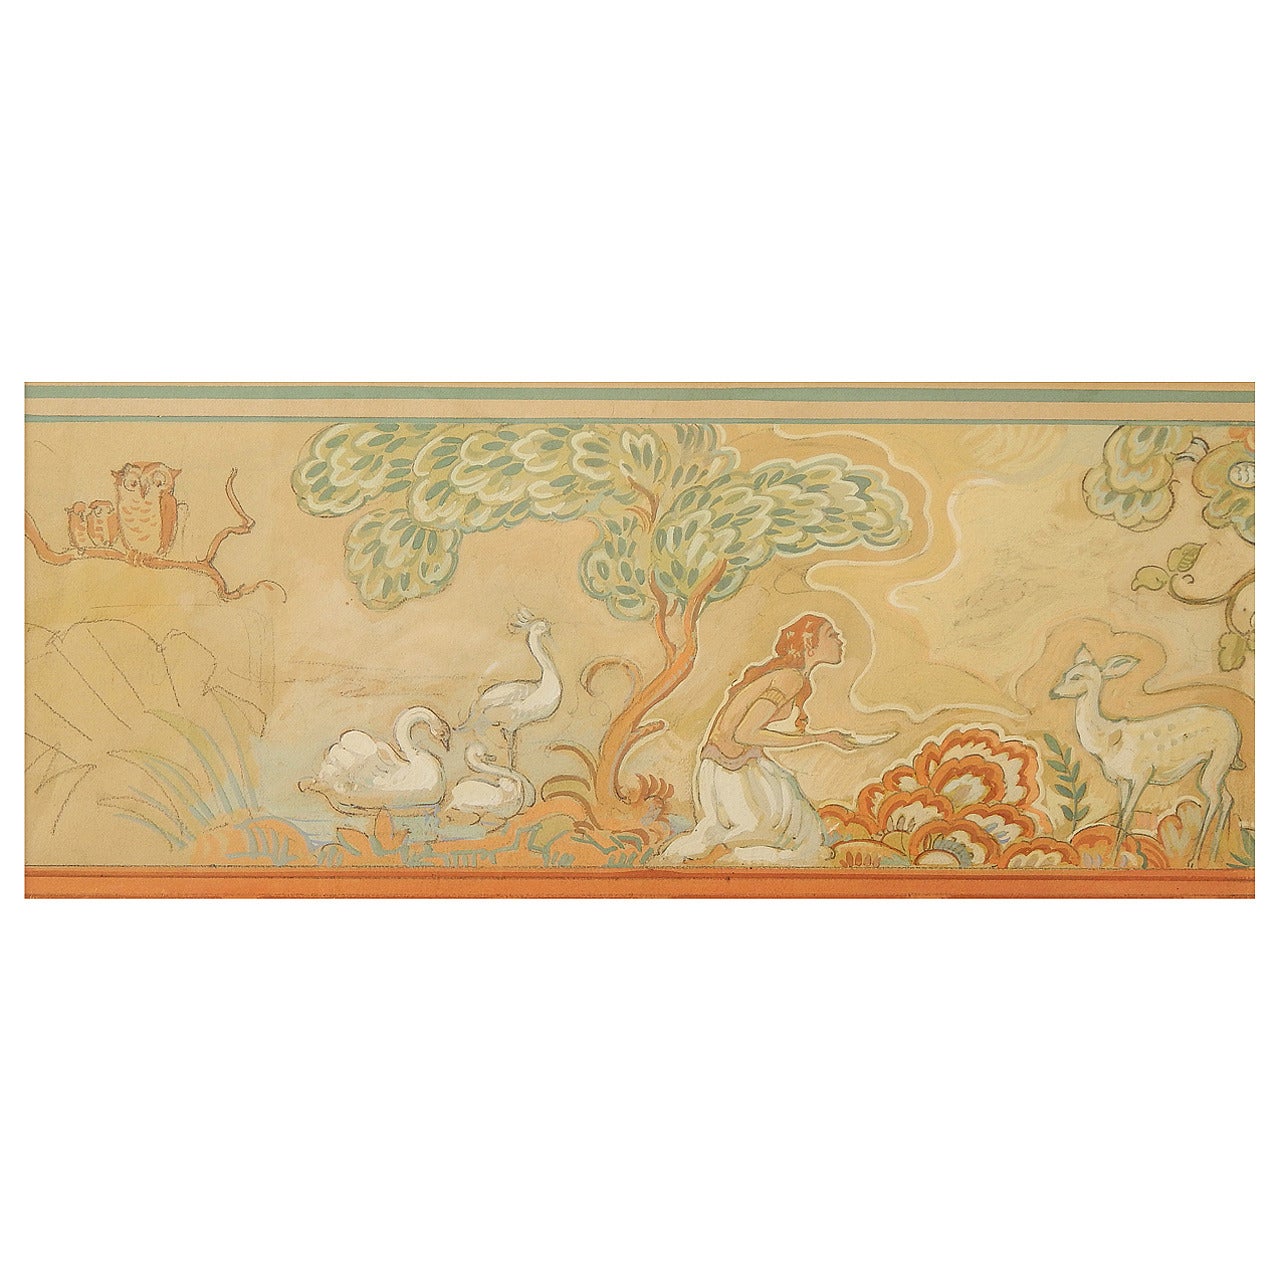 "Nymph and Fawn in Paradise, " Superb Art Deco Mural Study Painting by Petersen